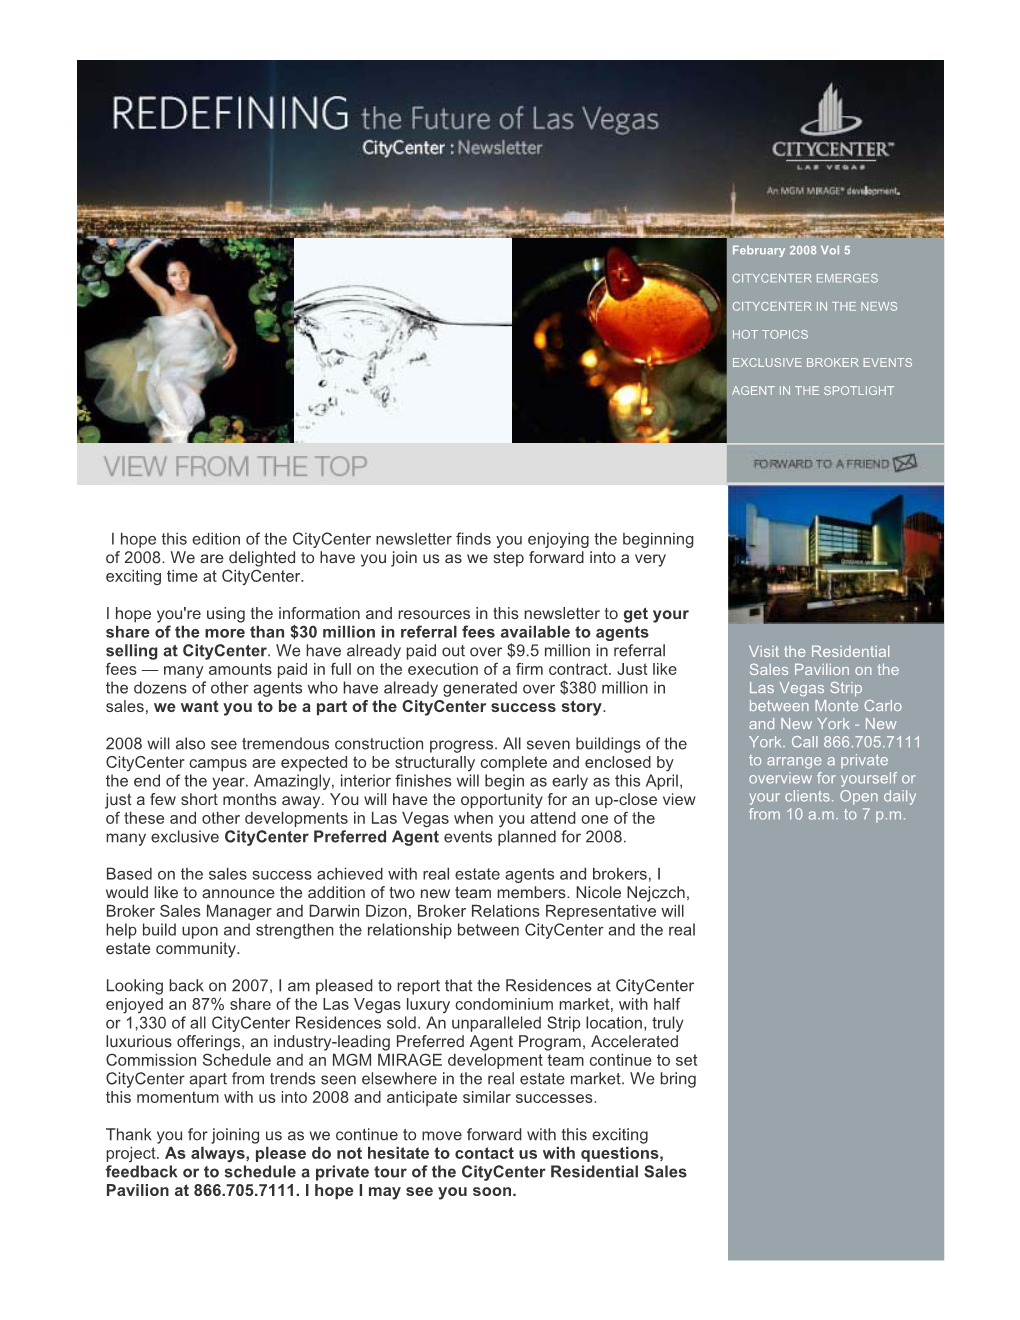 I Hope This Edition of the Citycenter Newsletter Finds You Enjoying the Beginning of 2008